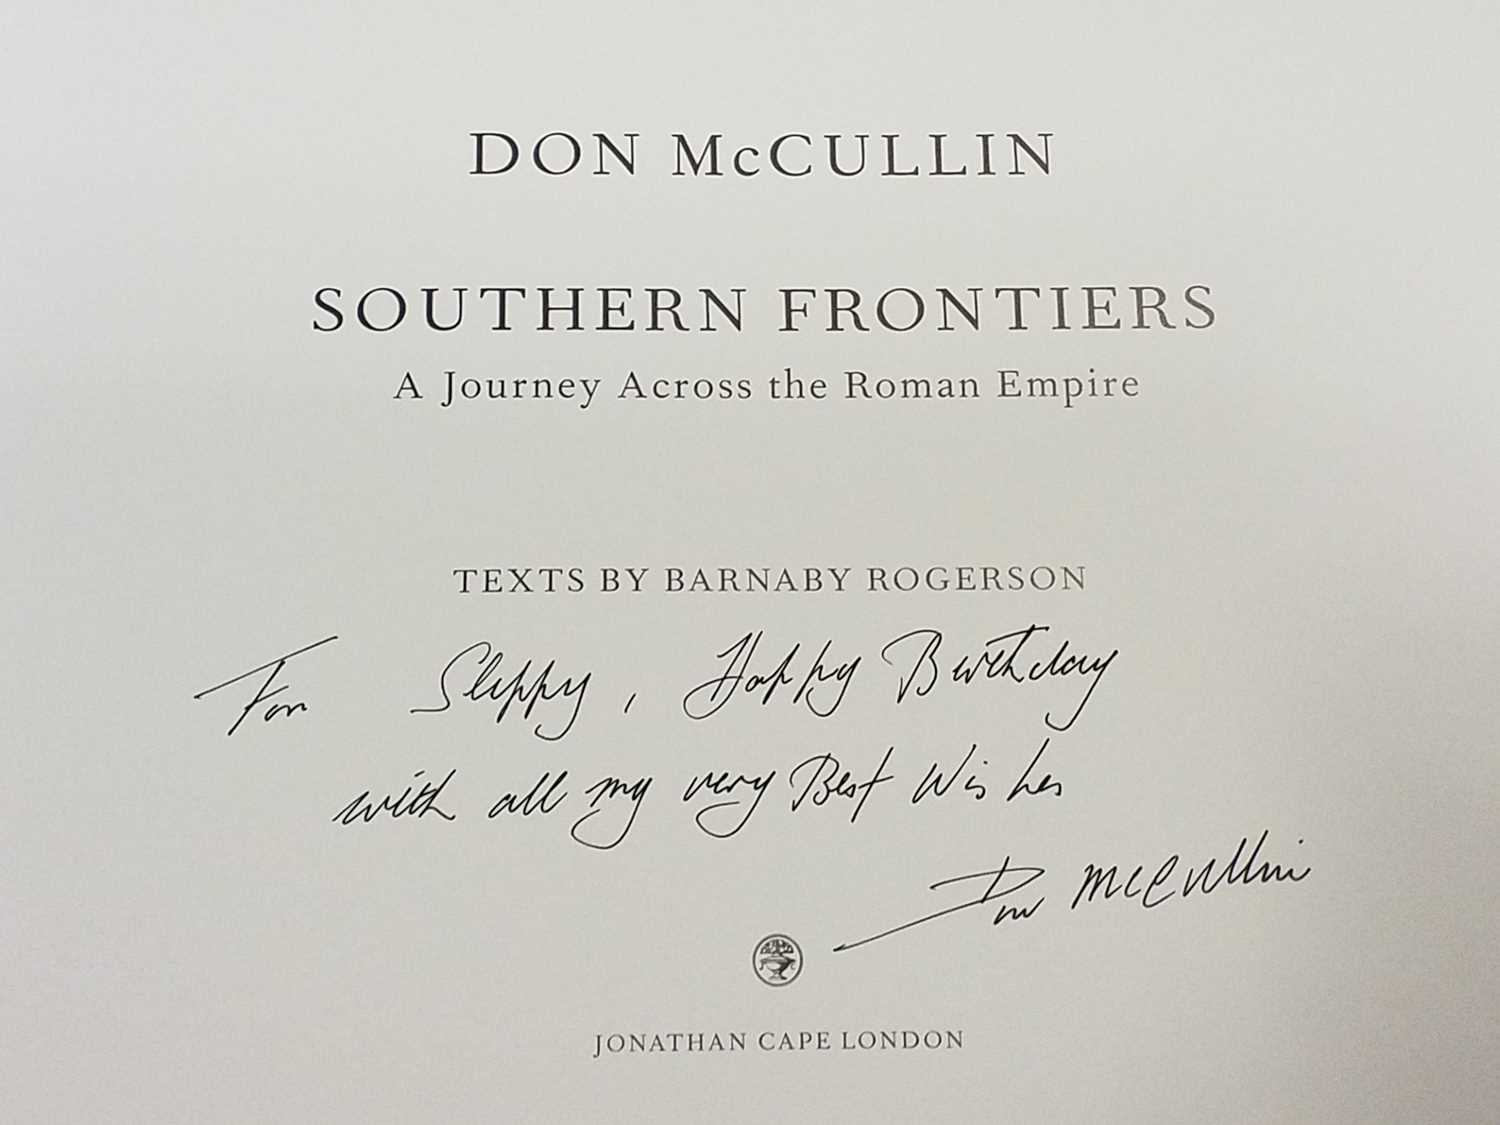 Lot 188 - McCullin (Don). Southern Frontiers, A Journey Across the Roman Empire, 1st edition, London: Jonathan Cape, 2010